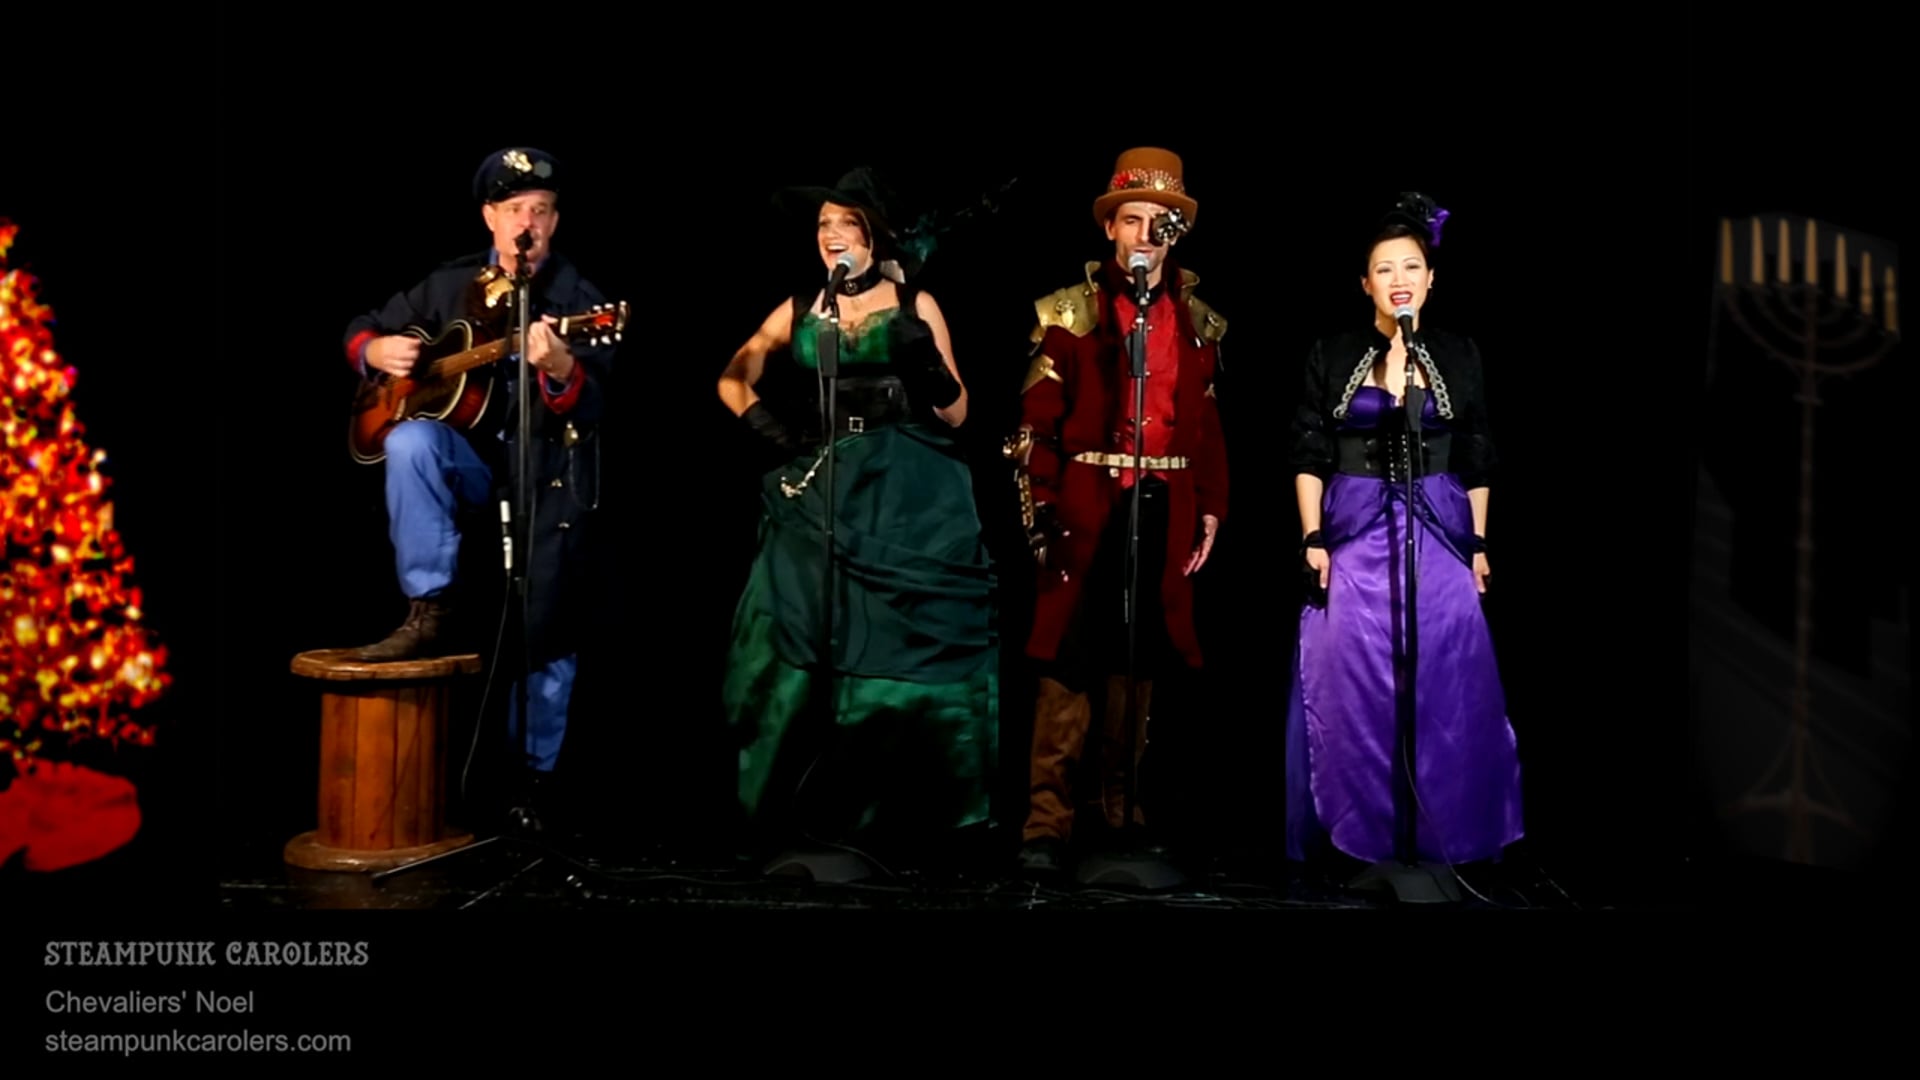 Promotional video thumbnail 1 for Steampunk Carolers